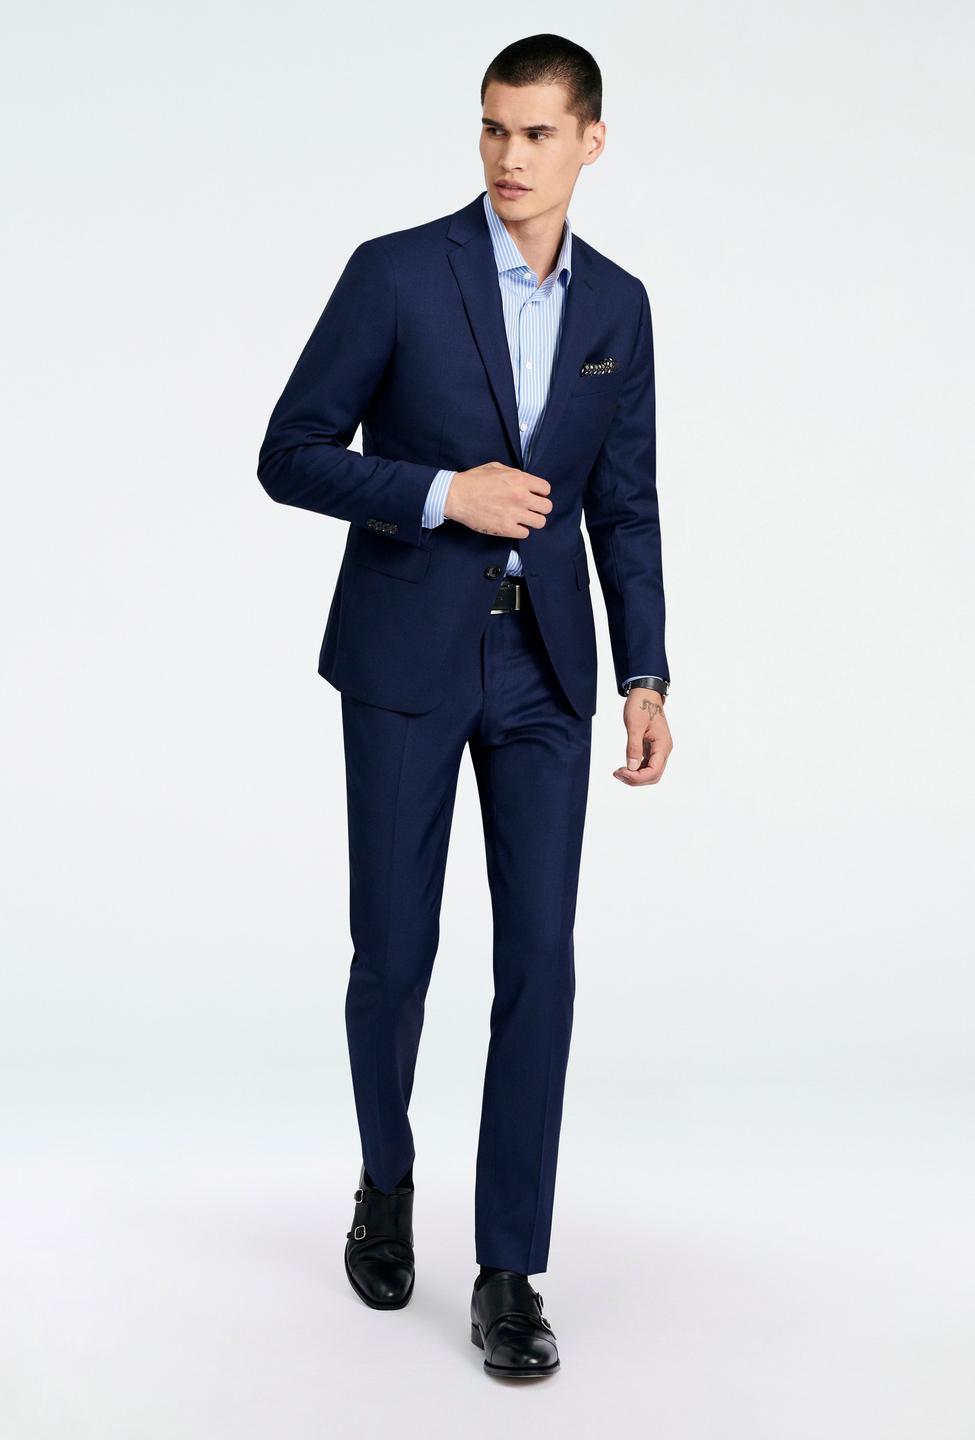 Blue suit - Malvern Houndstooth Design from Seasonal Indochino Collection